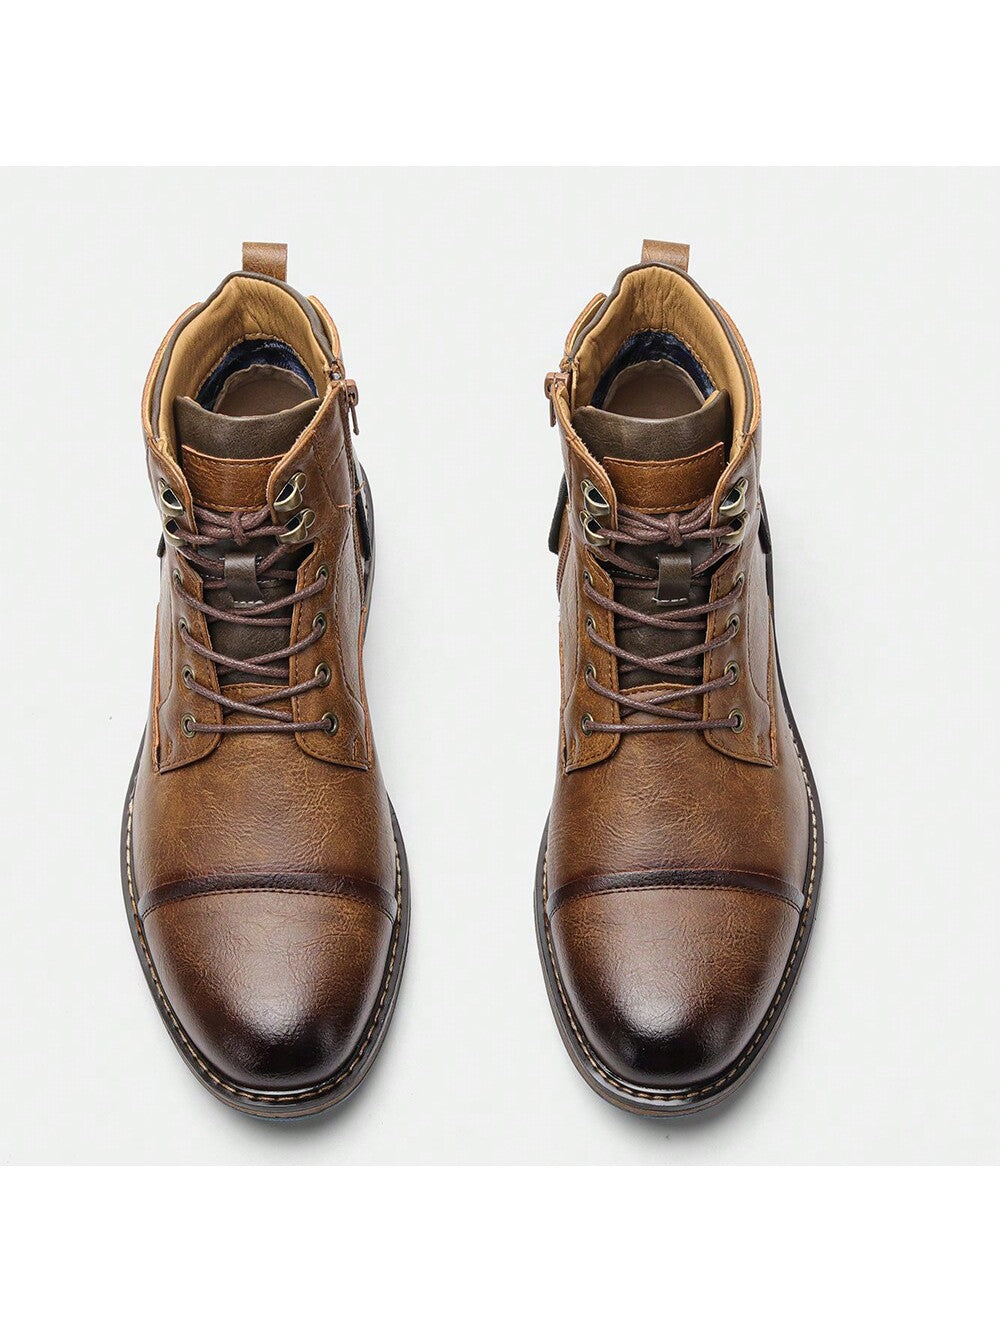 Men's Stylish And Simple Comfortable Lace-up Boots